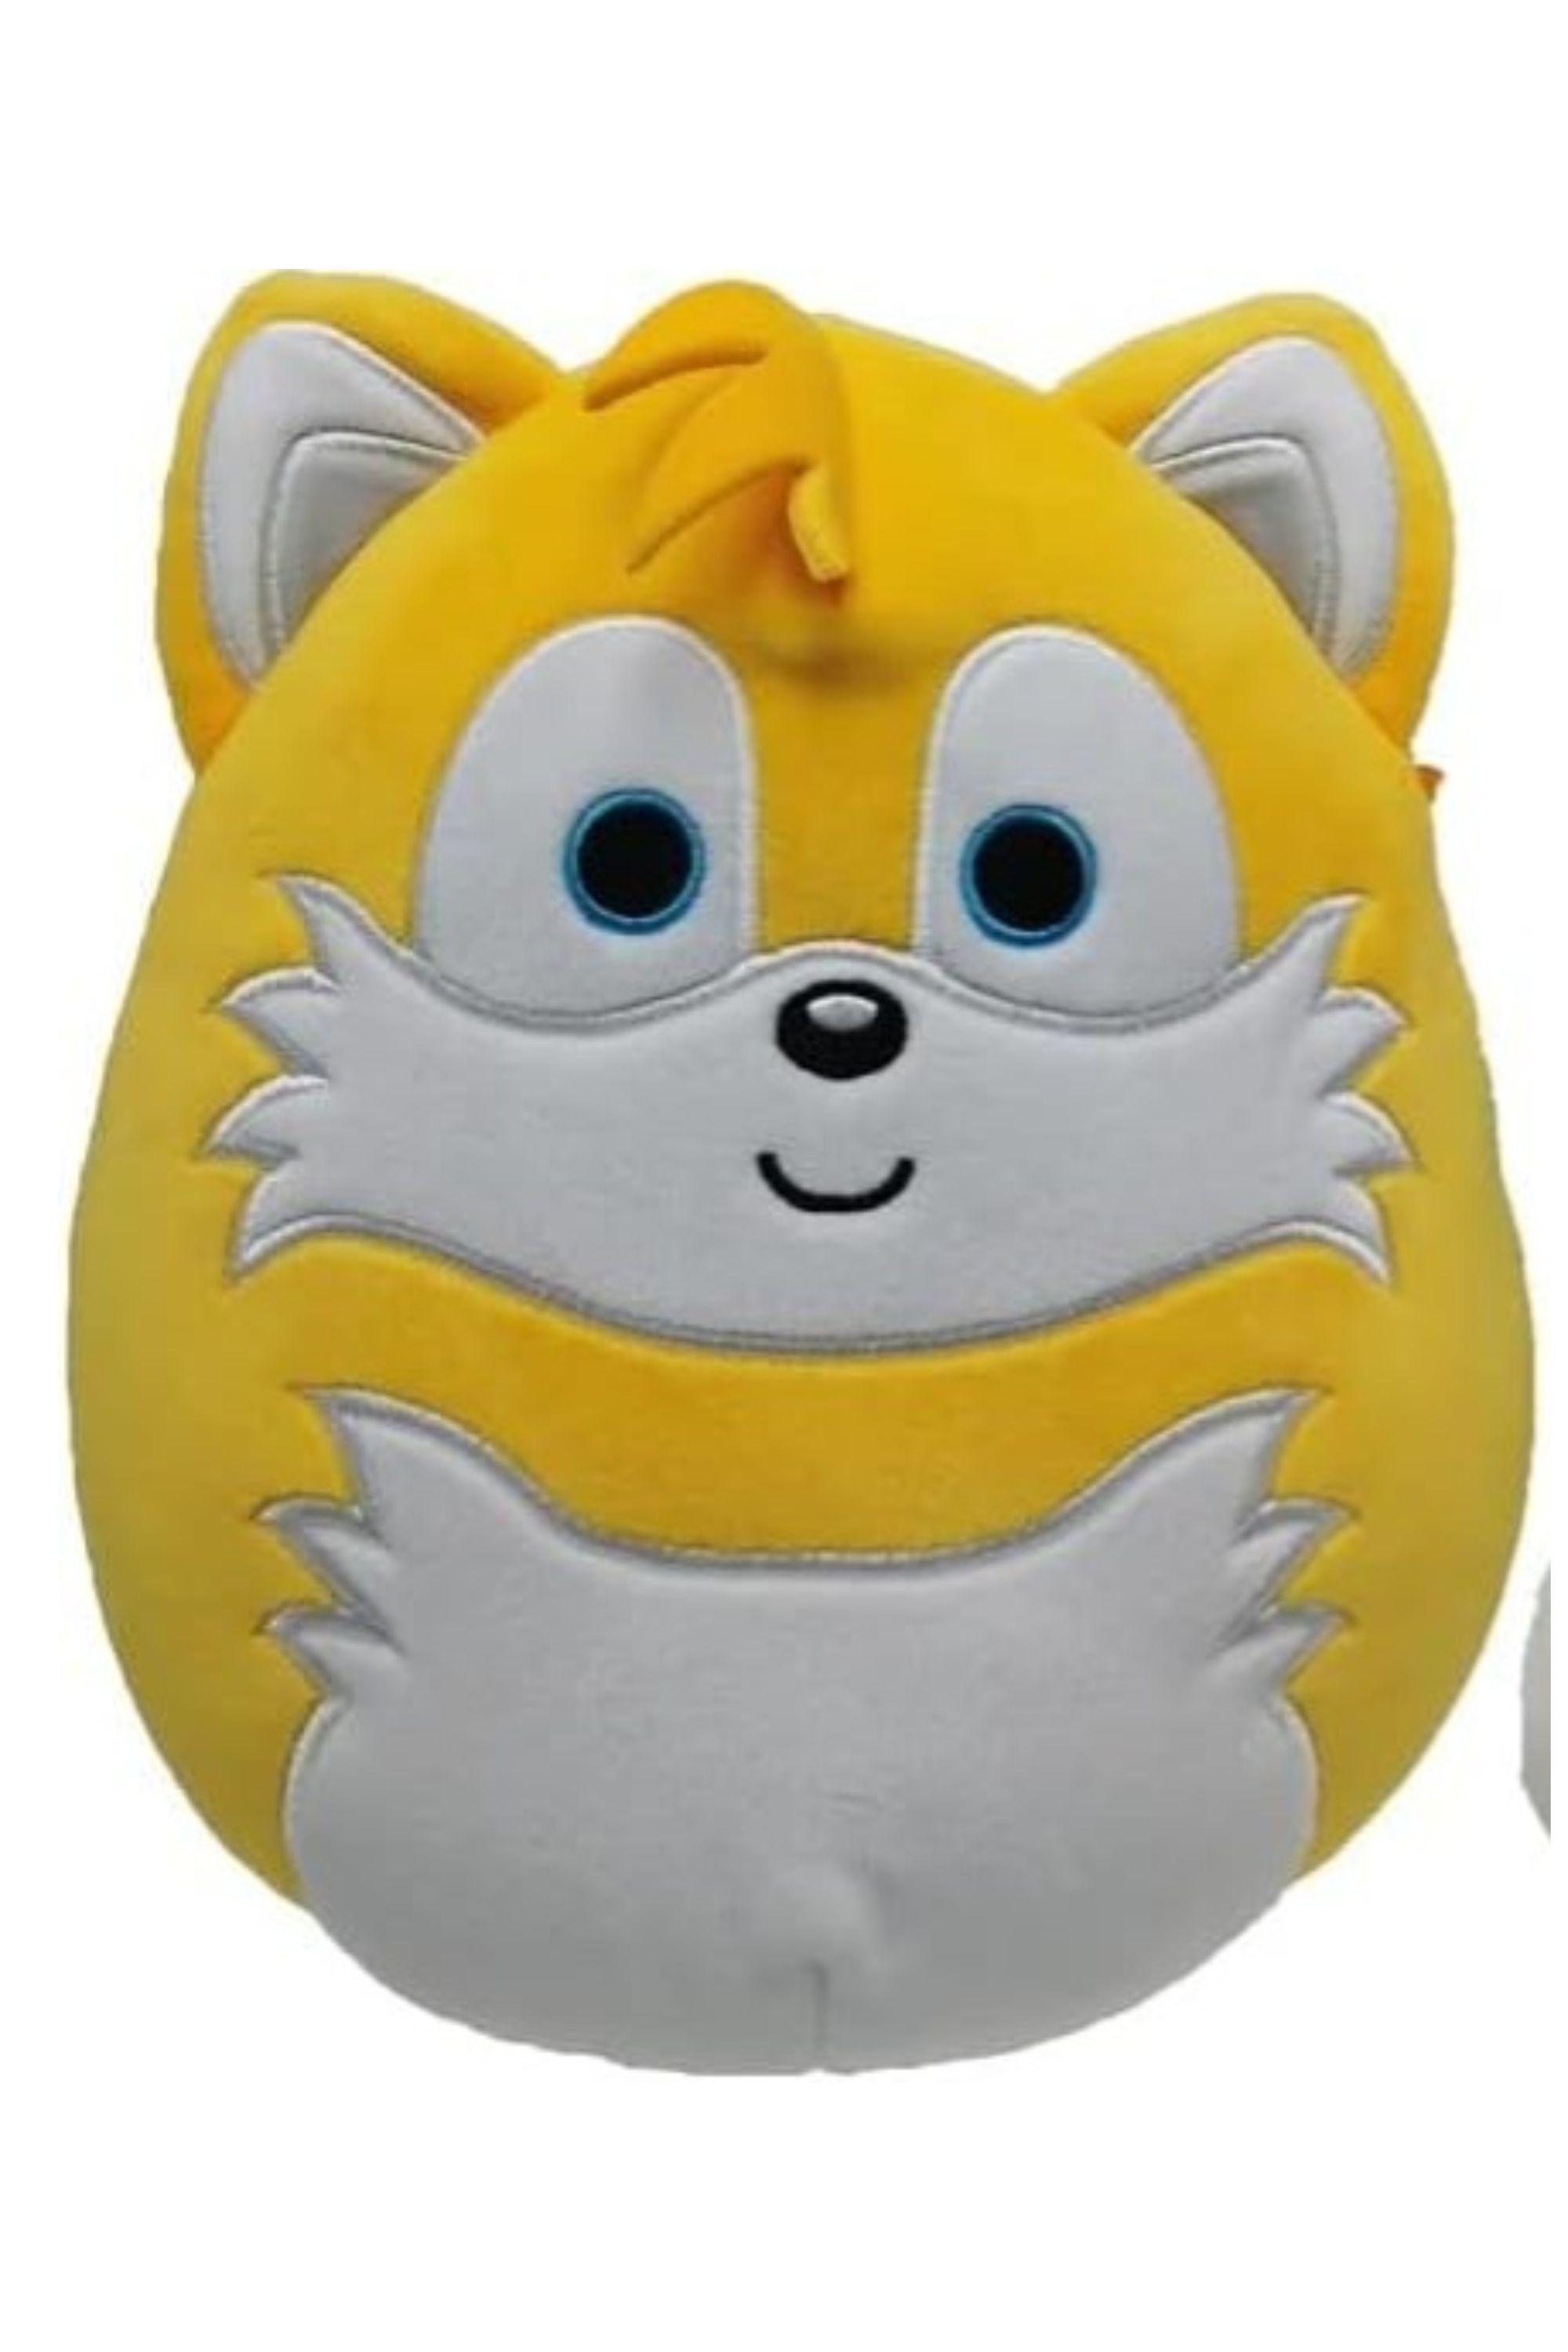 Piplup and winking Pikachu Squishmallows teased